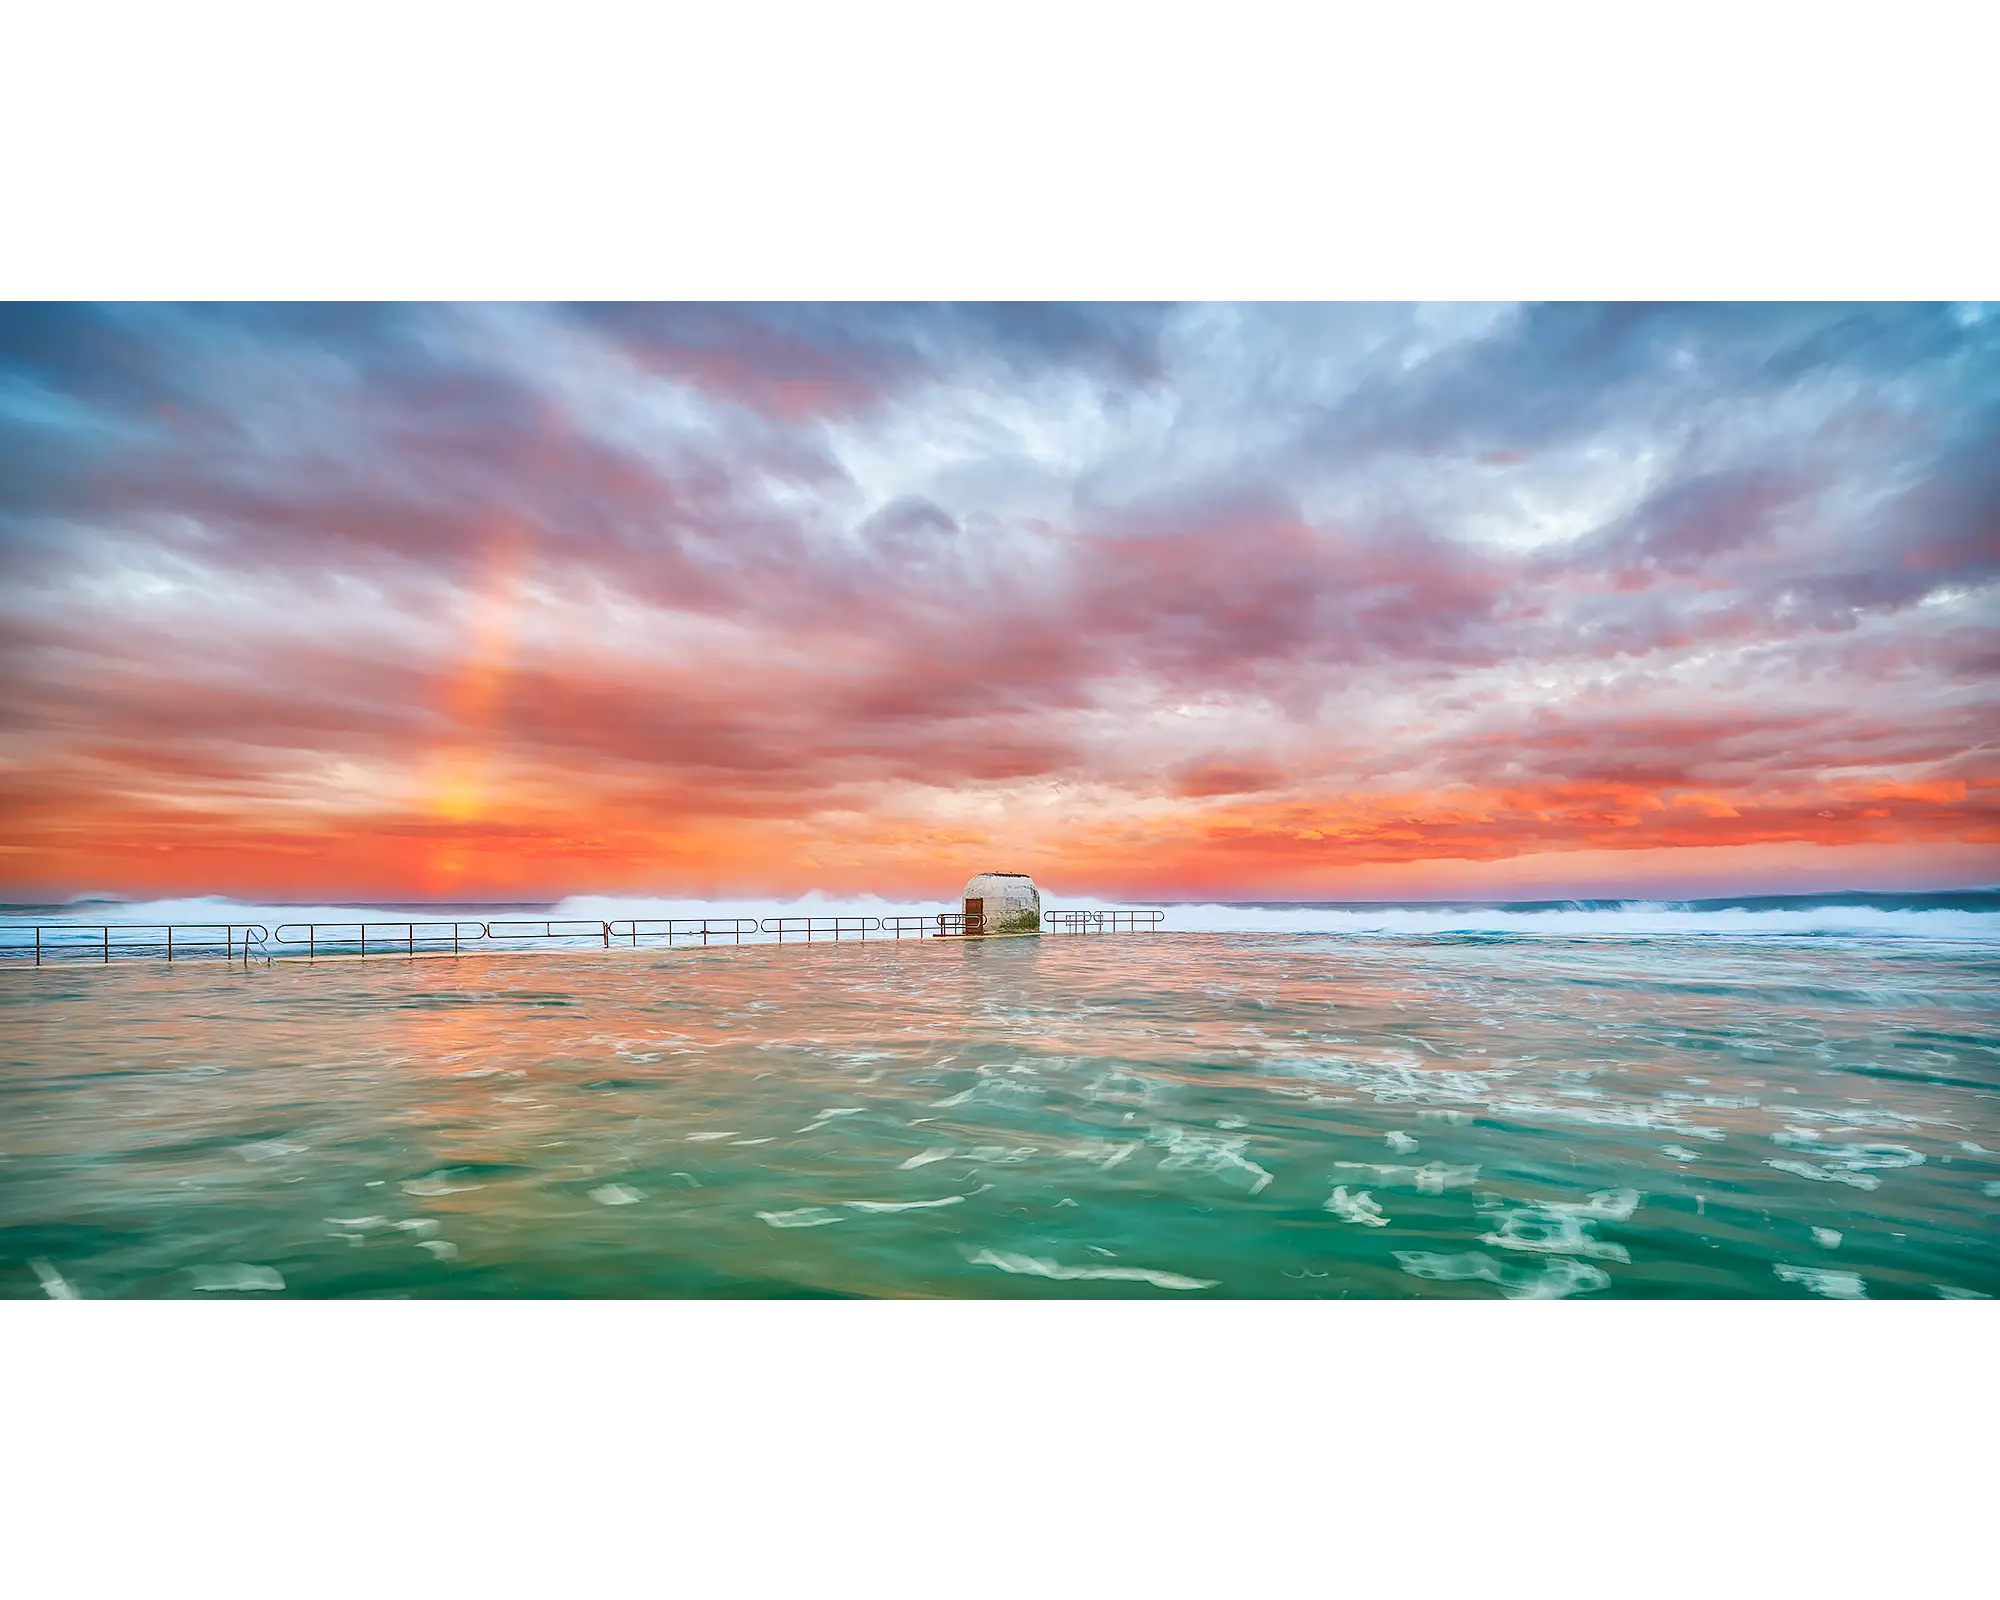 Colour Burst - Rainbow and colourful clouds over Merewether Ocean Baths, Newcastle.